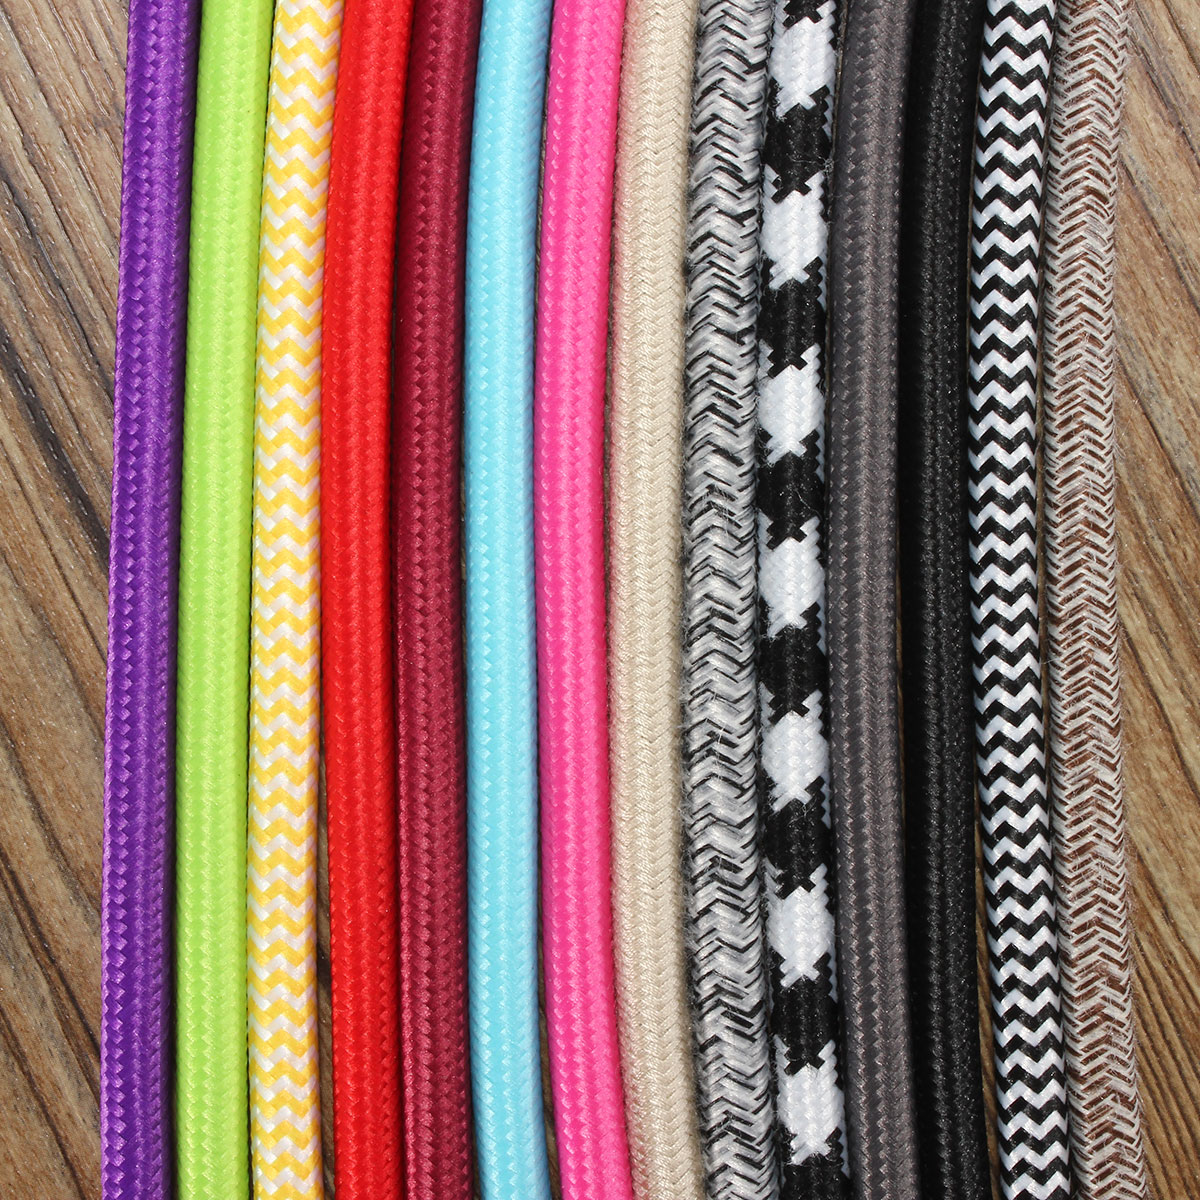 1M-2-Cord-Color-Vintage-Twist-Braided-Fabric-Light-Cable-Electric-Wire-1069141